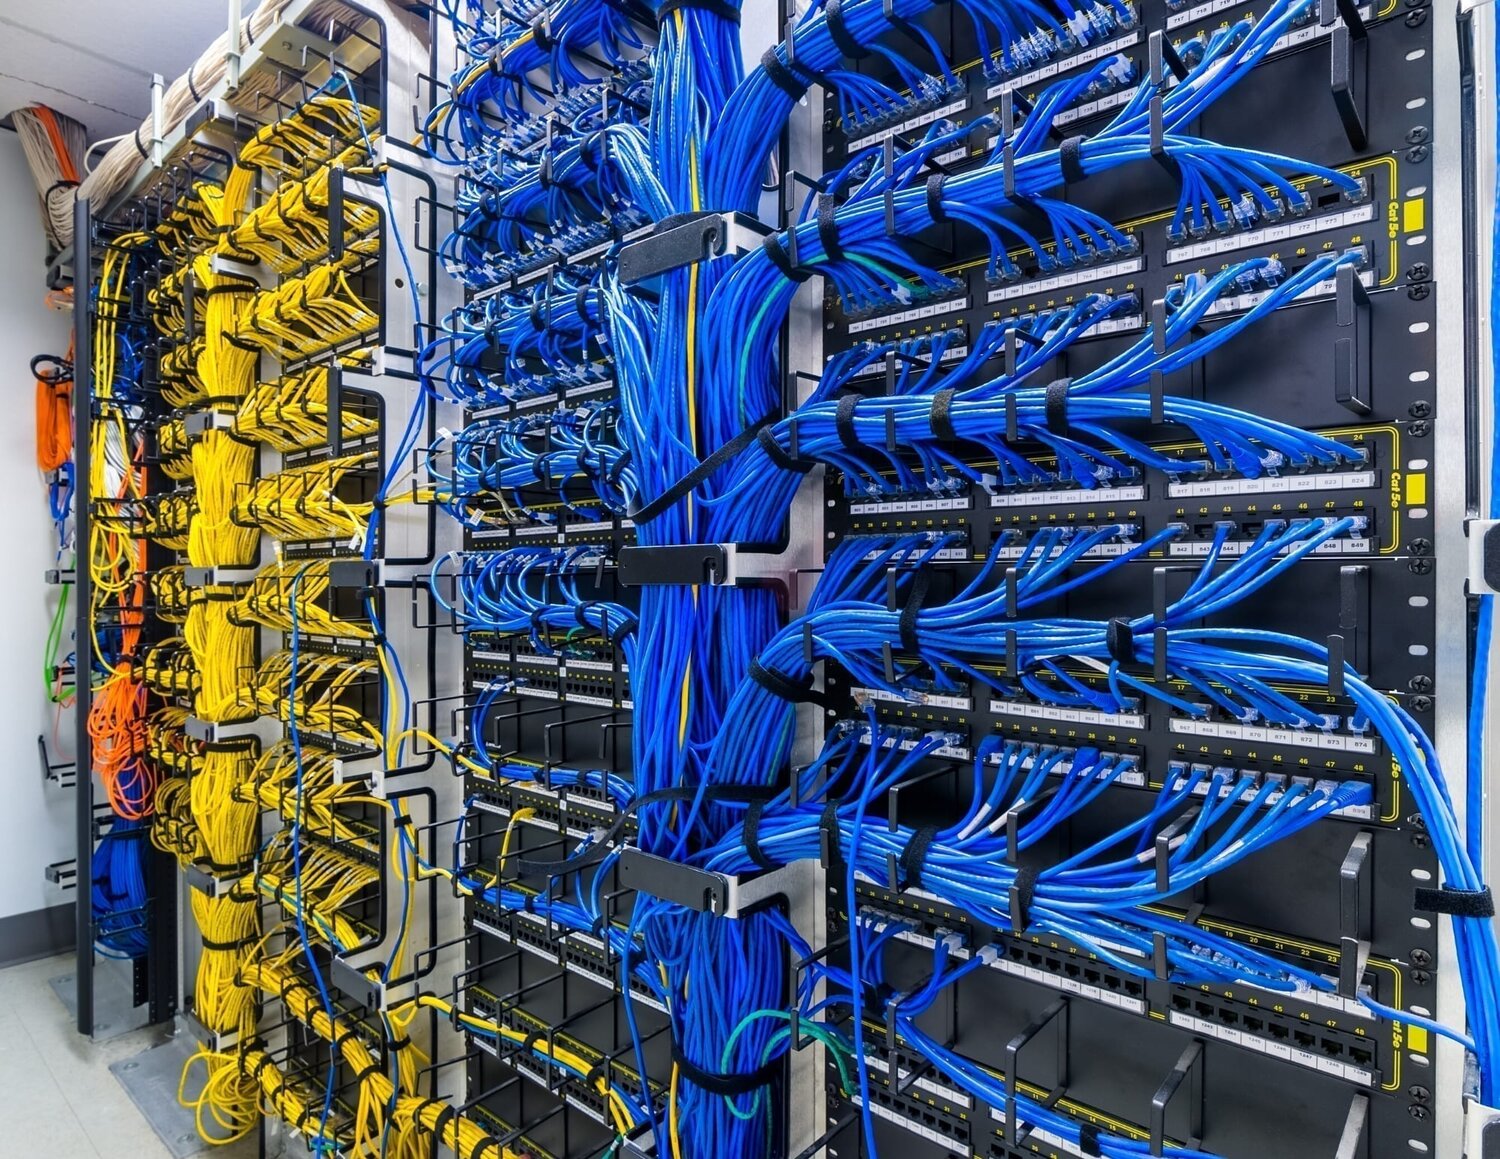 MS Netowrks Structured Cable Management Systems